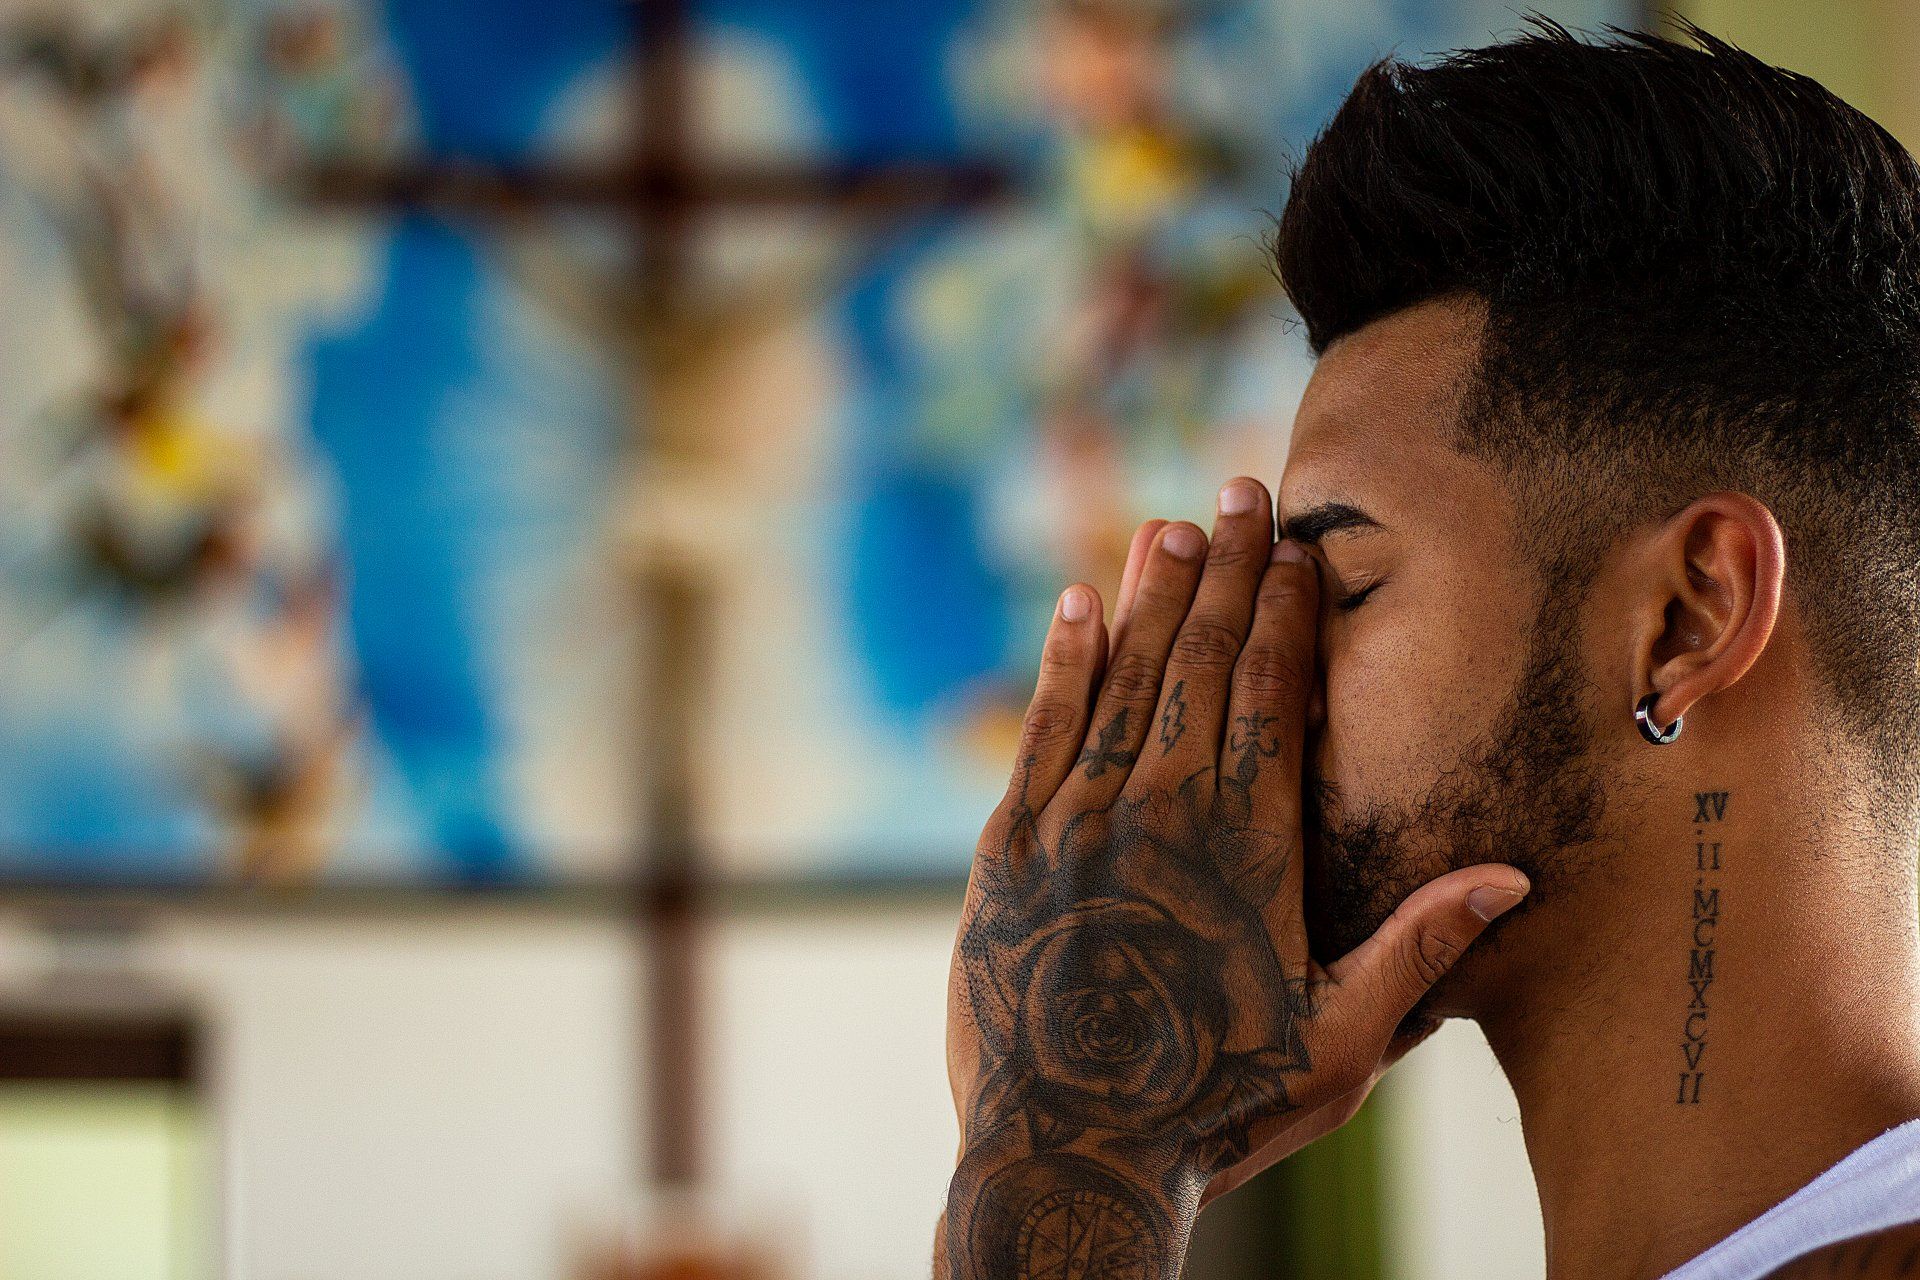 A man with a tattoo on his neck is praying in front of a cross.